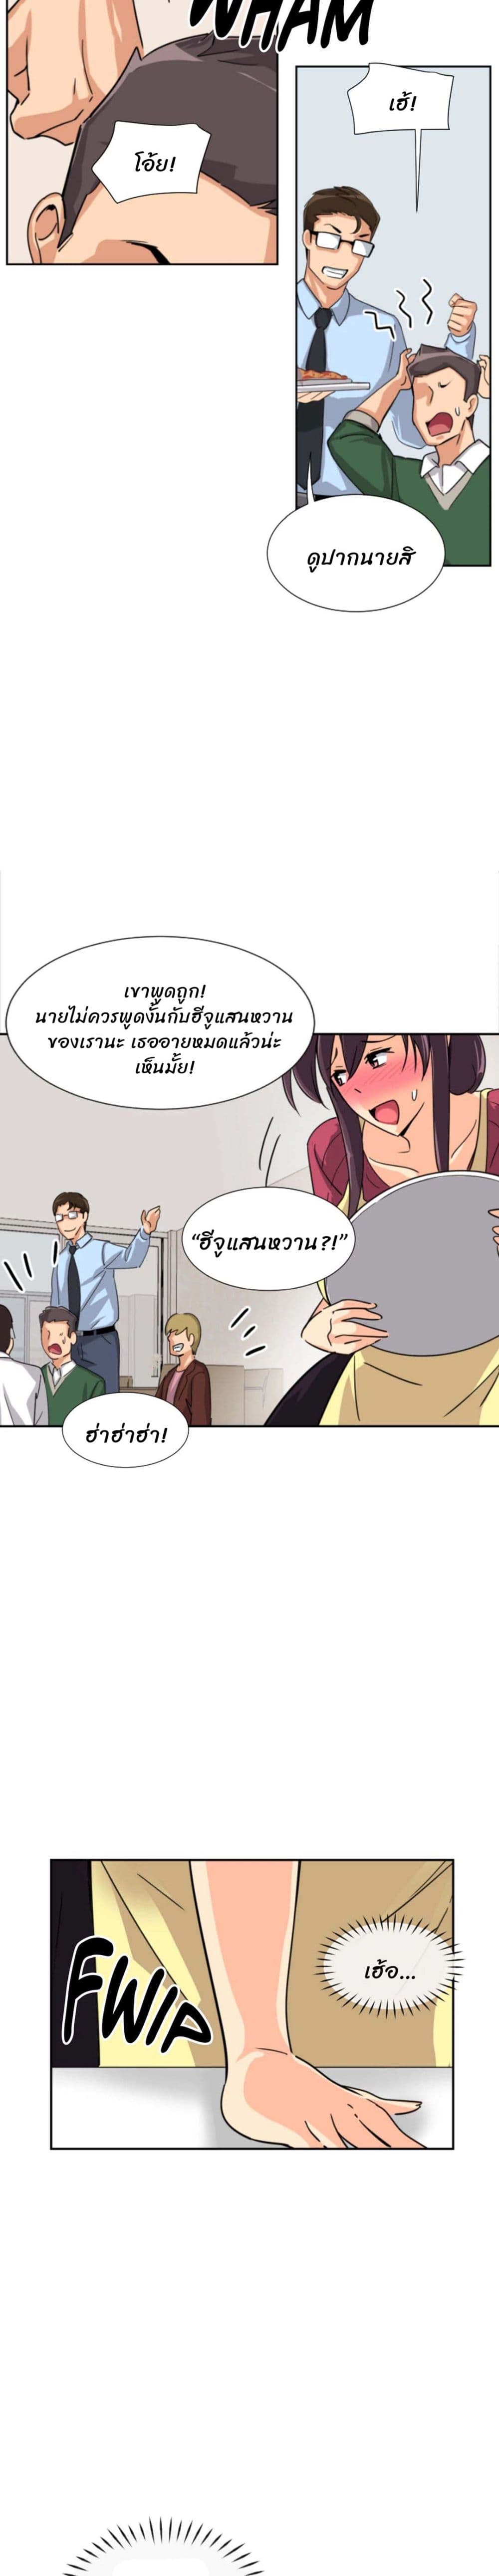 How to Train Your Wife 23 ภาพที่ 7